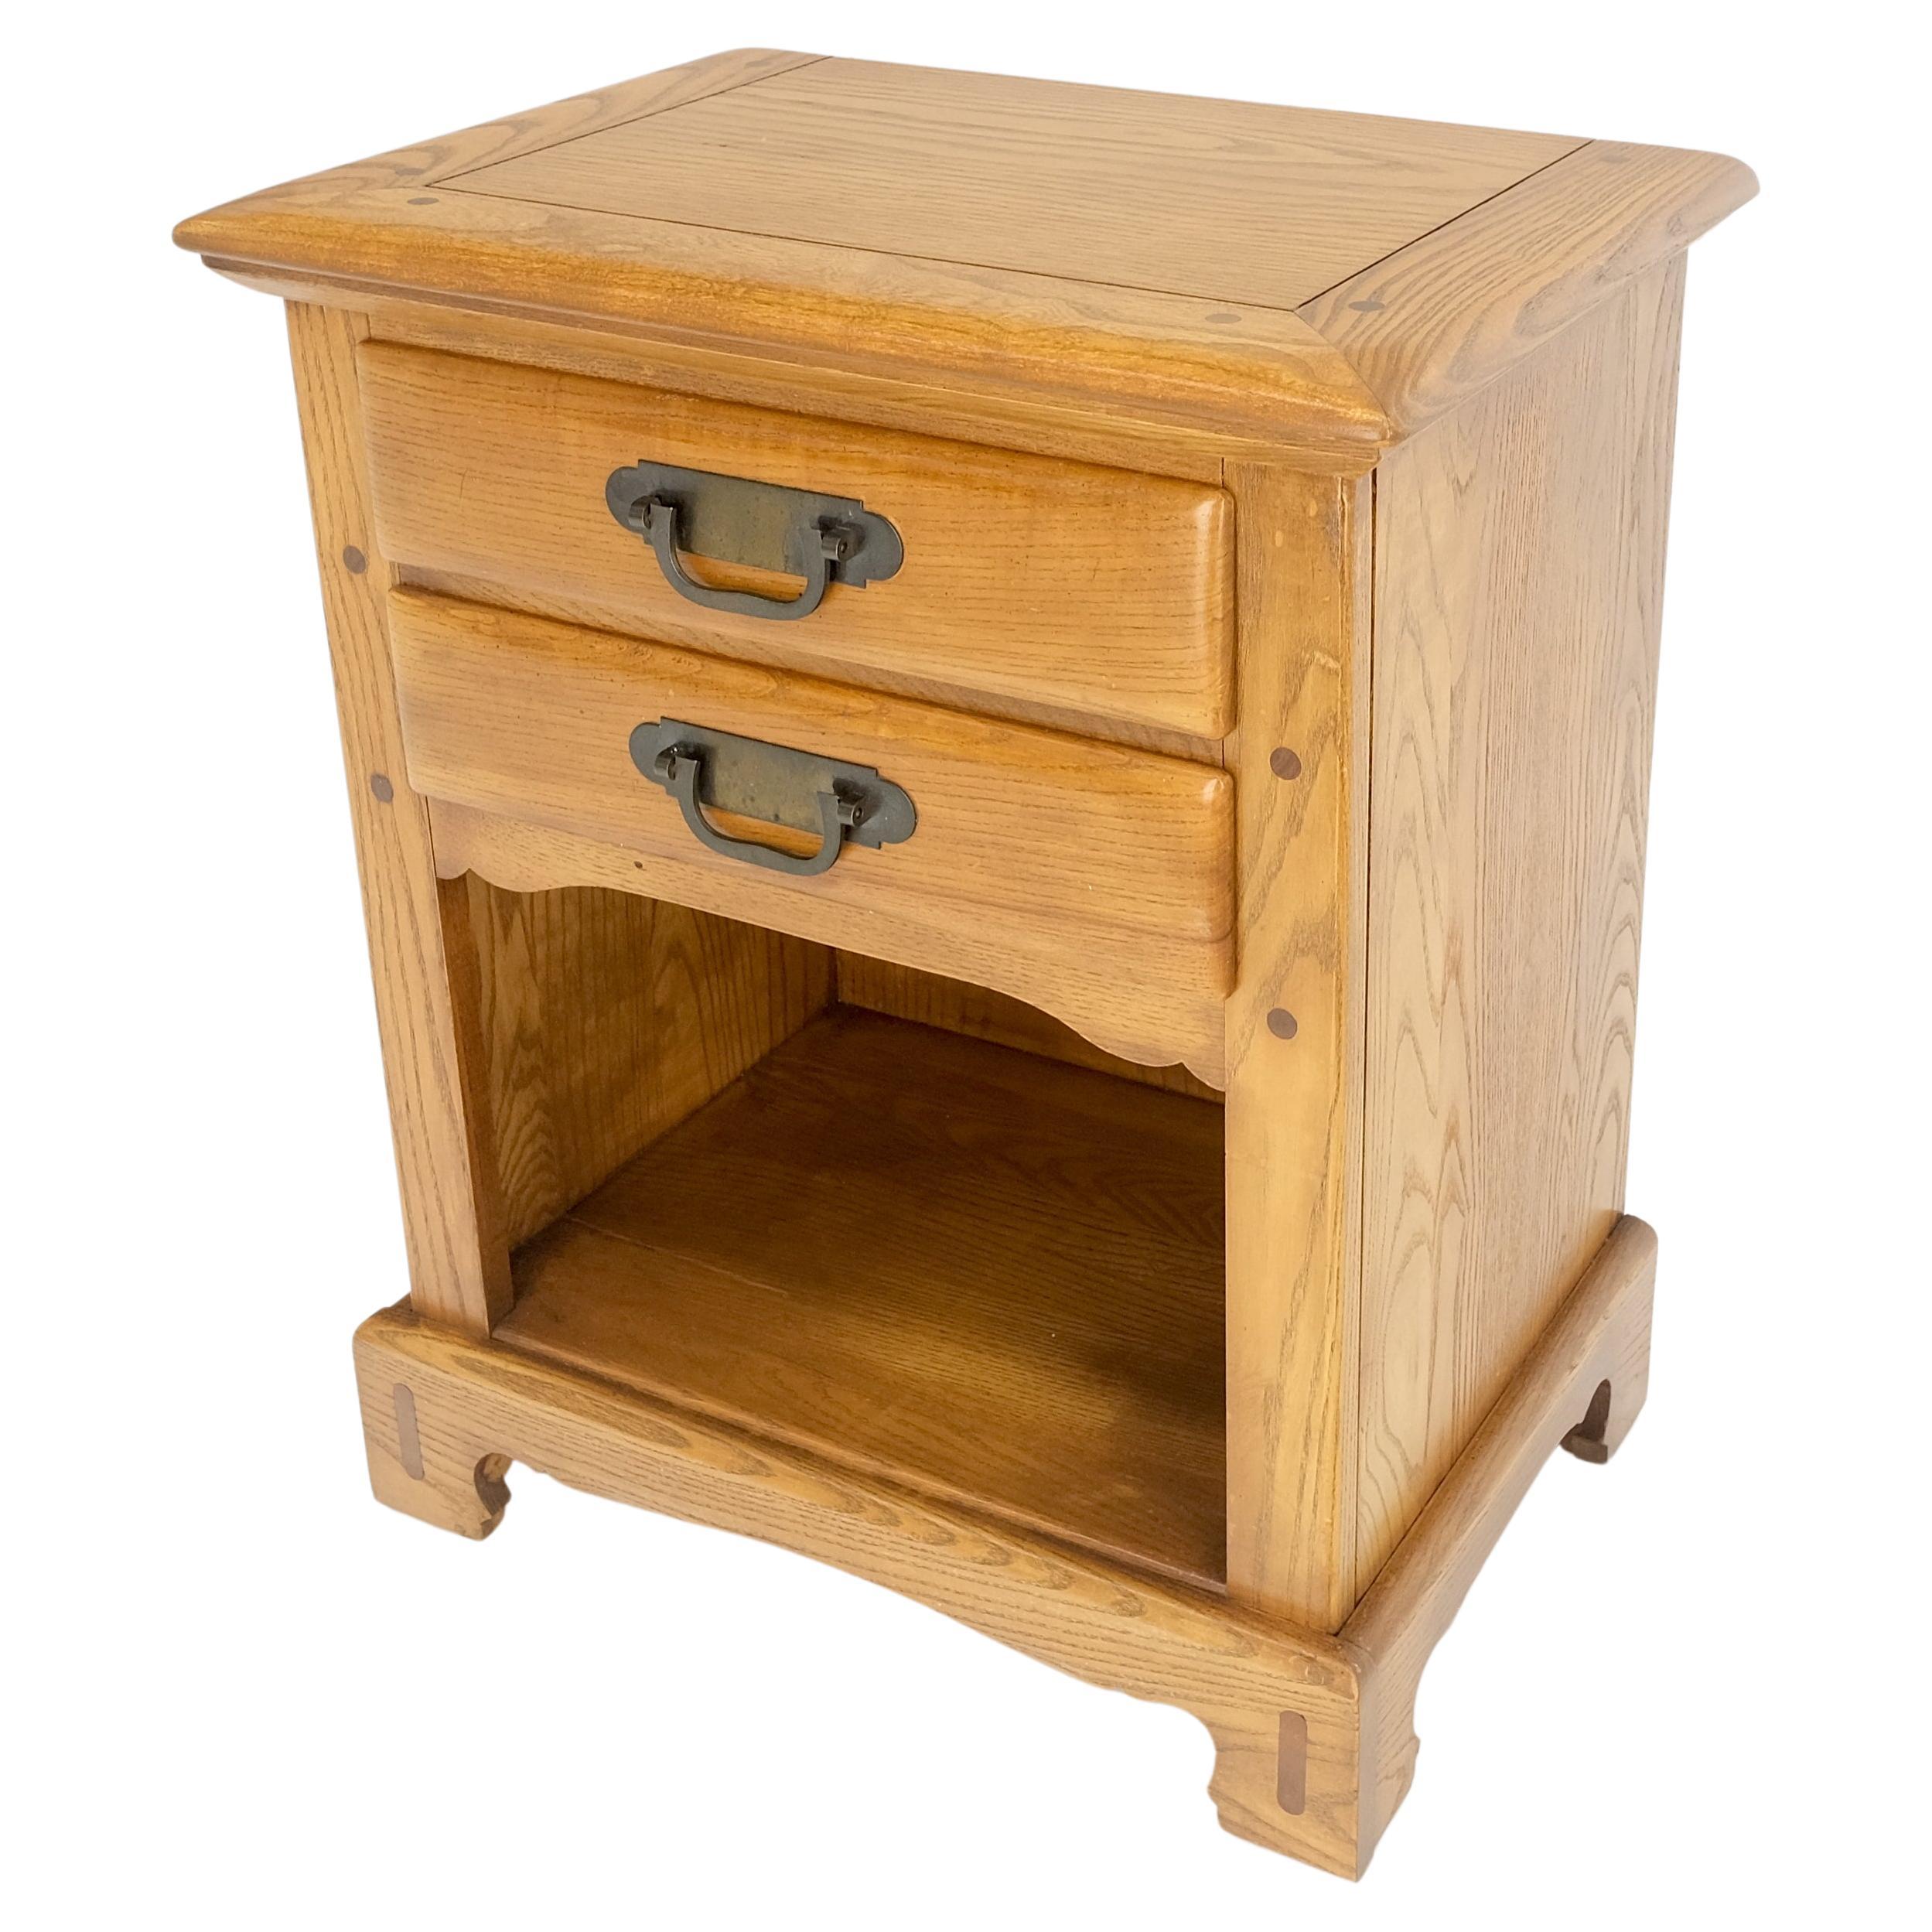 Solid Chestnut 2 Drawers Pegged Joint Honey Amber Finish Night Stands Table MINT For Sale